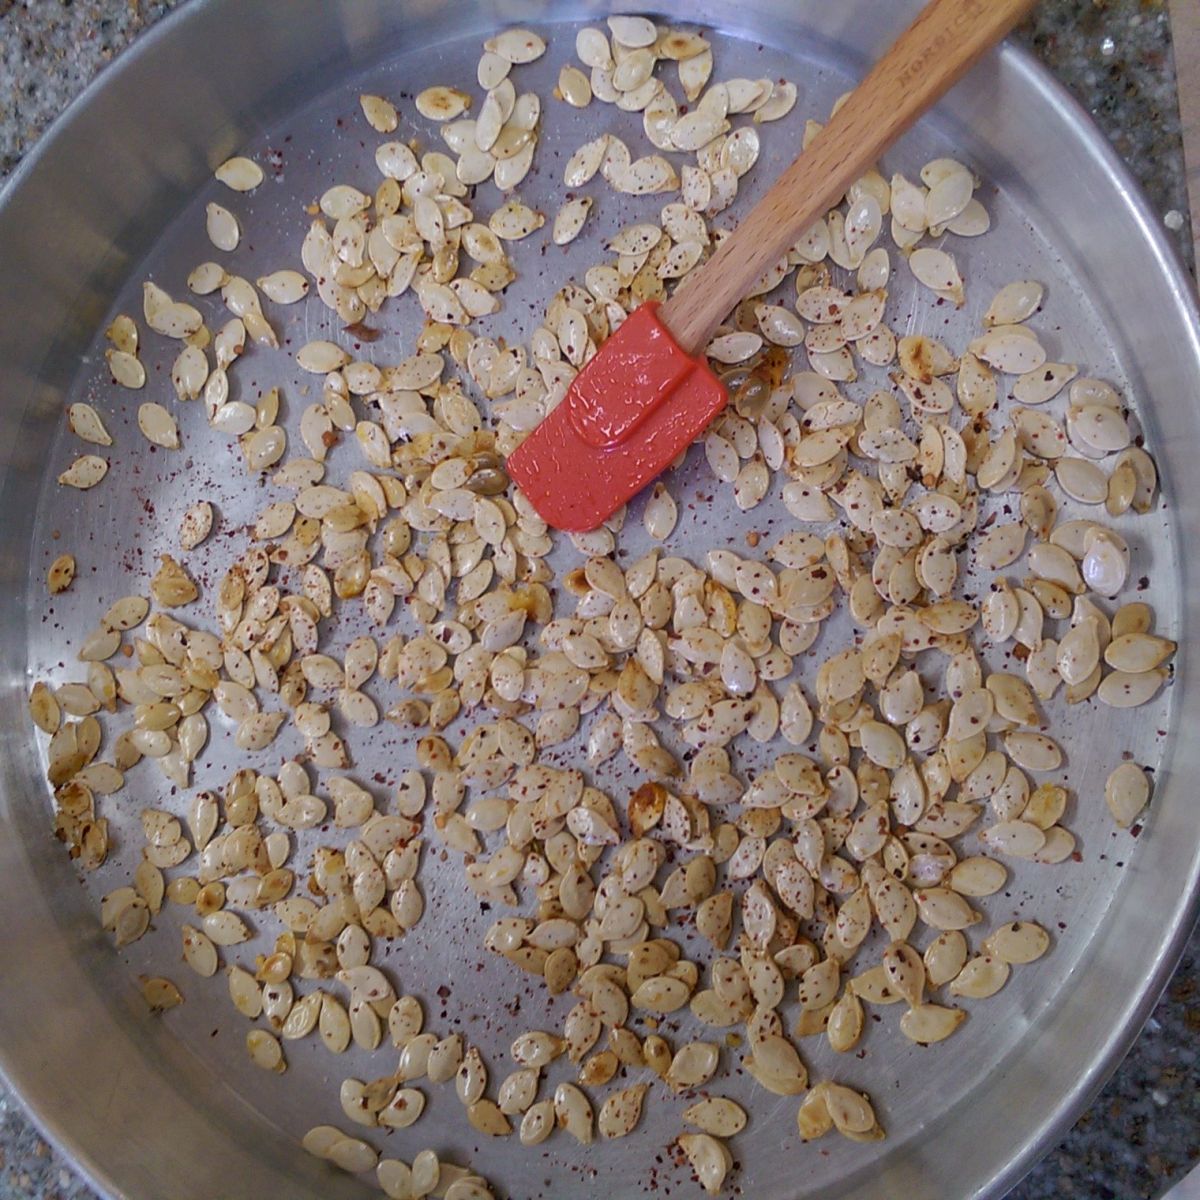 Spread out your pumpkin seeds and add a few teaspoons of your favorite spice. 